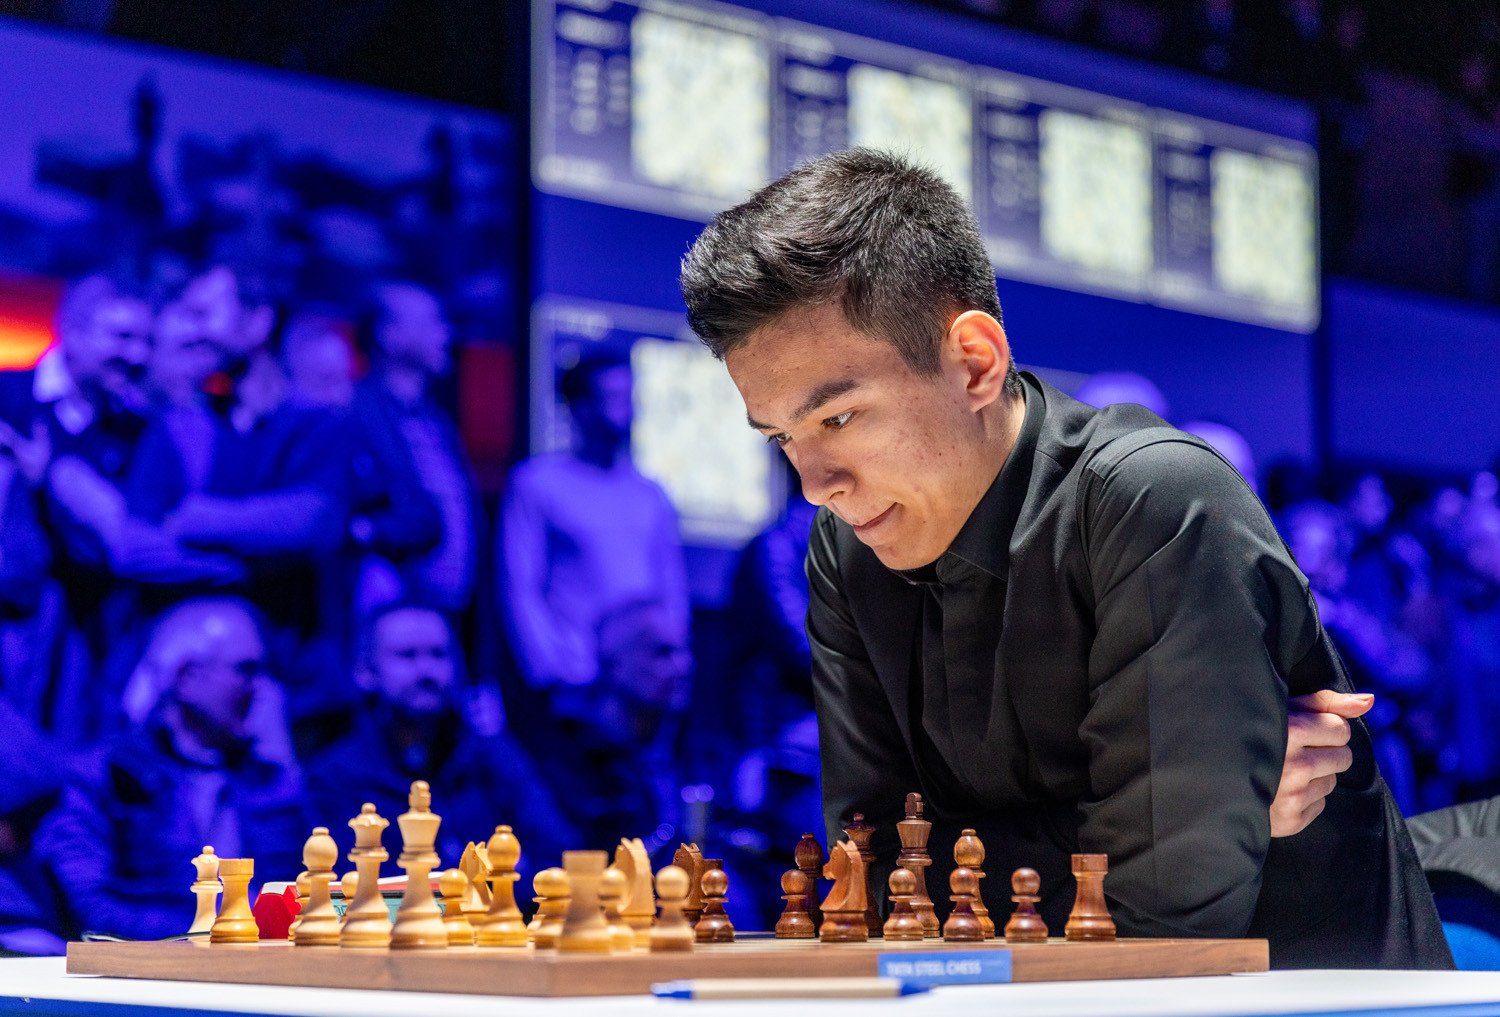 Magnus loses 2 classical Chess games in a row at the Tata Steel Tourna